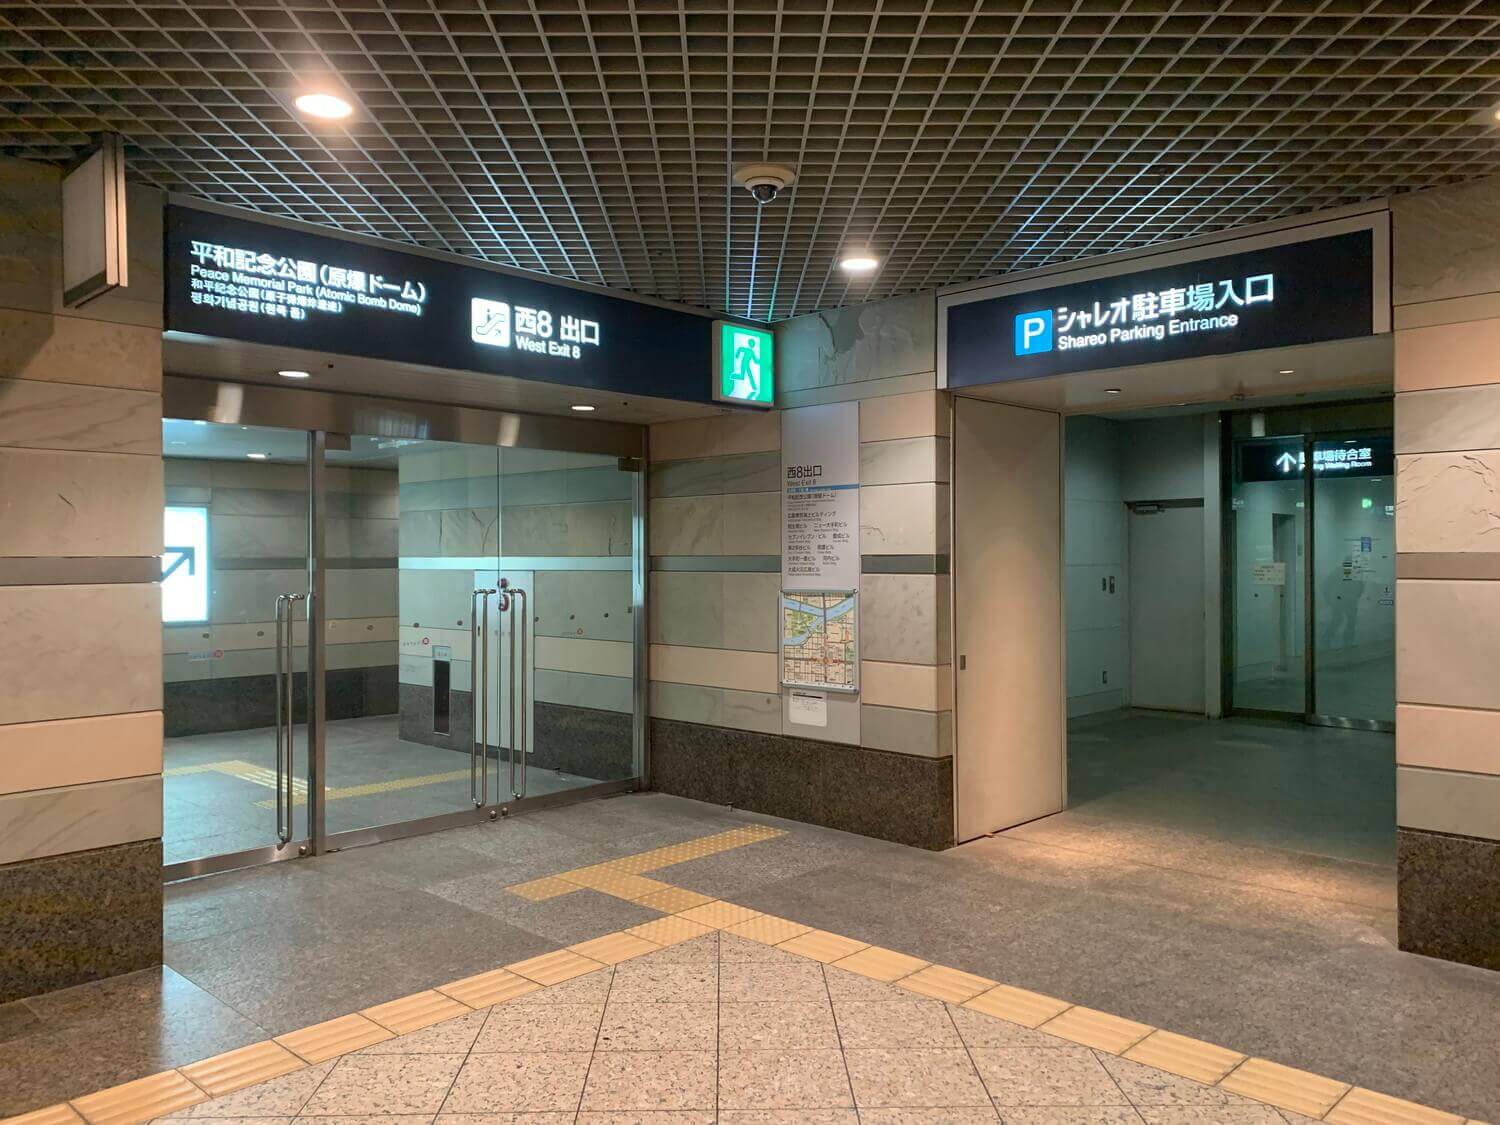 Shareo west No.8 exit